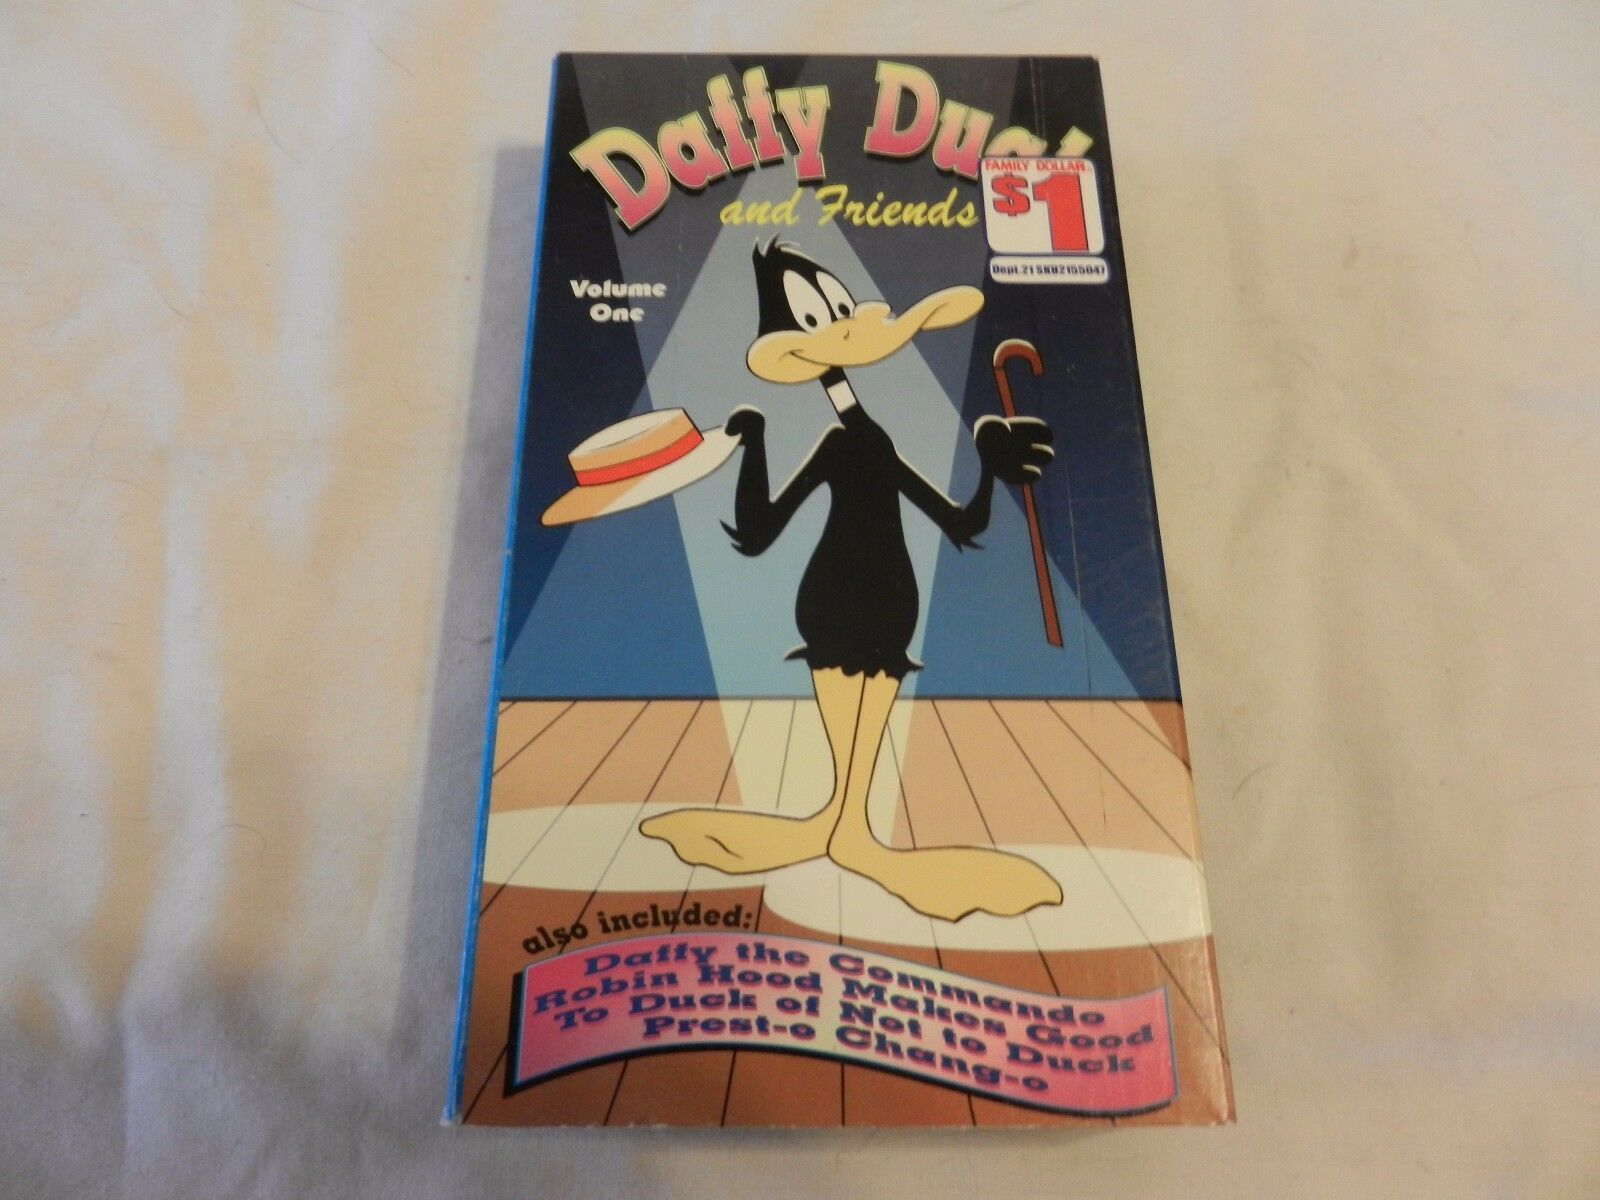 Daffy Duck and Friends Volume One VHS Tape - VHS Tapes